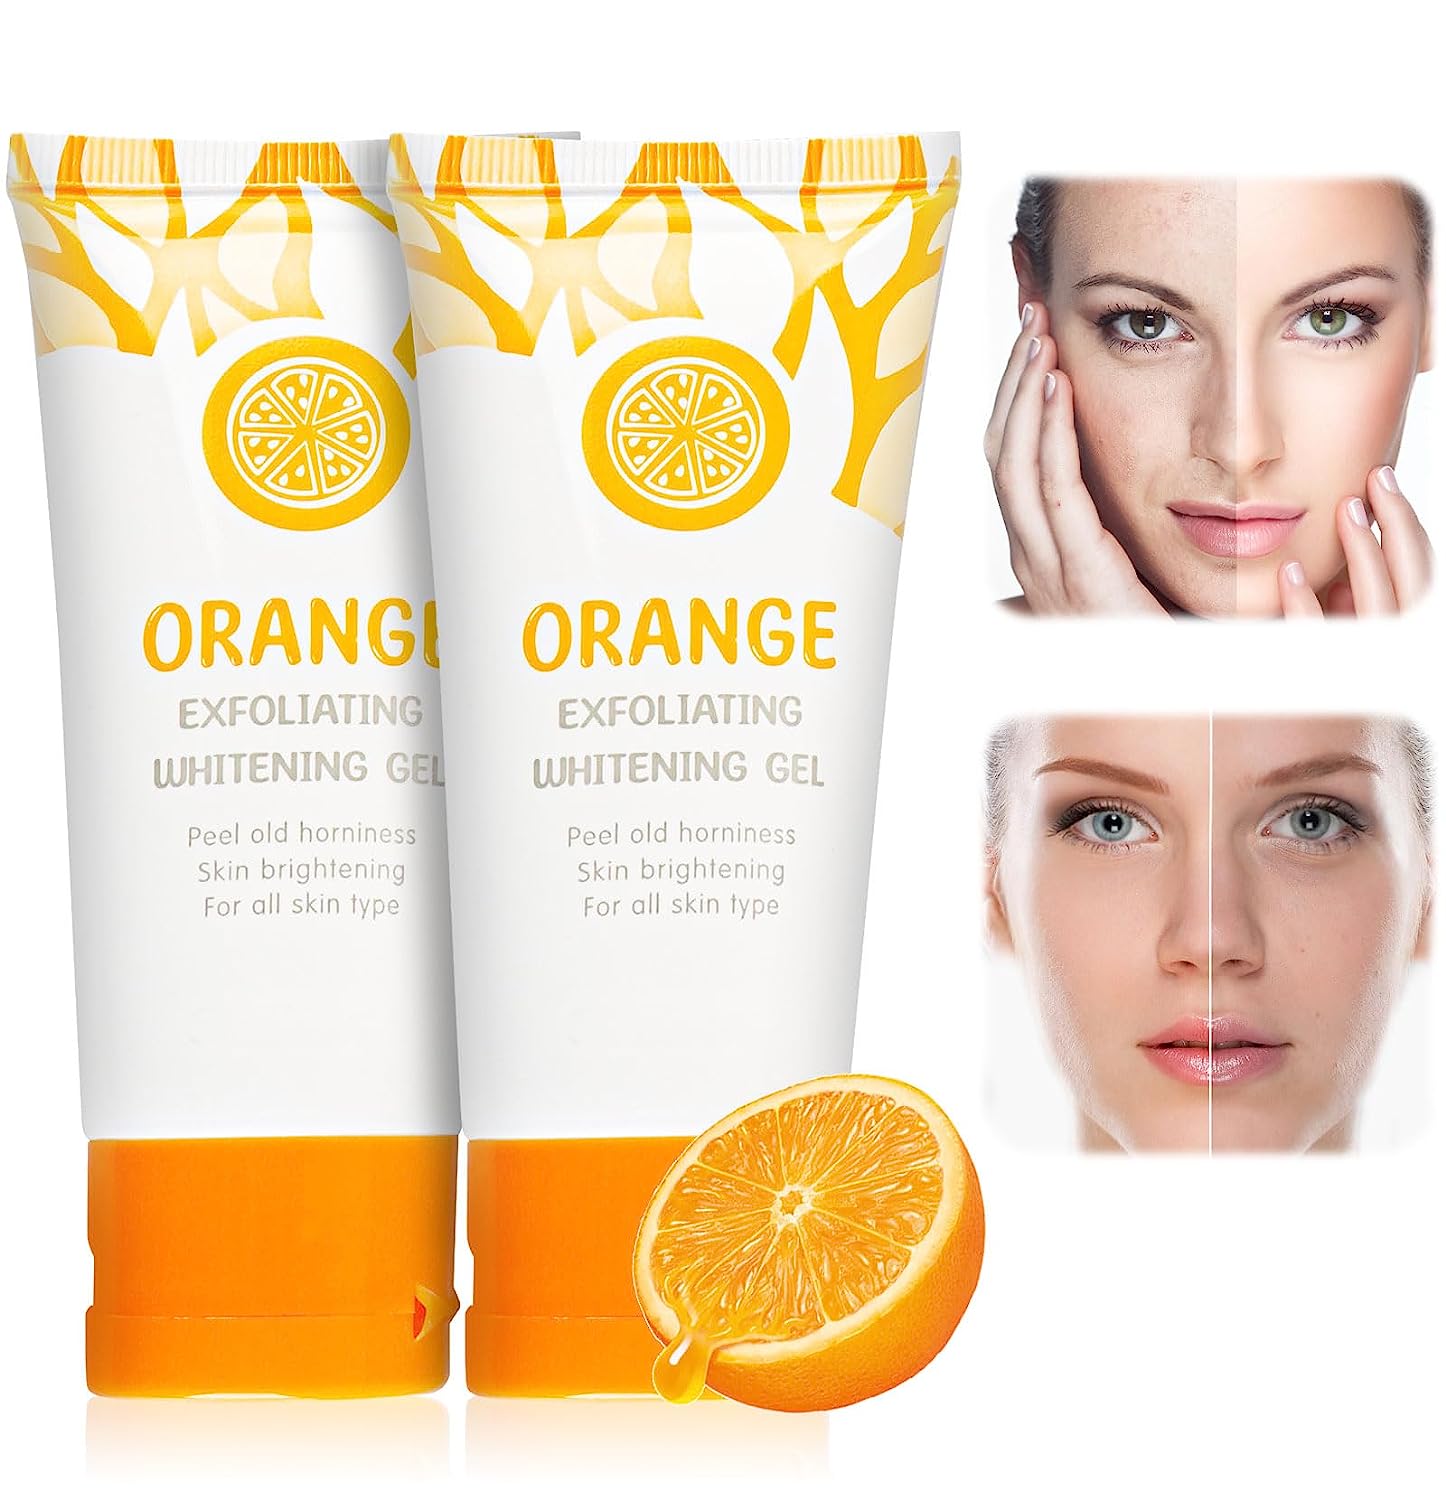 Pack of 2 Exfoliating Gel Women\'s Face, Brightening Exfoliating Whitening Gel Orange Exfoliating Gel Face Scrub for Women Reduce Skin Spots, Deep Cleansing and Smoothing for Women Face